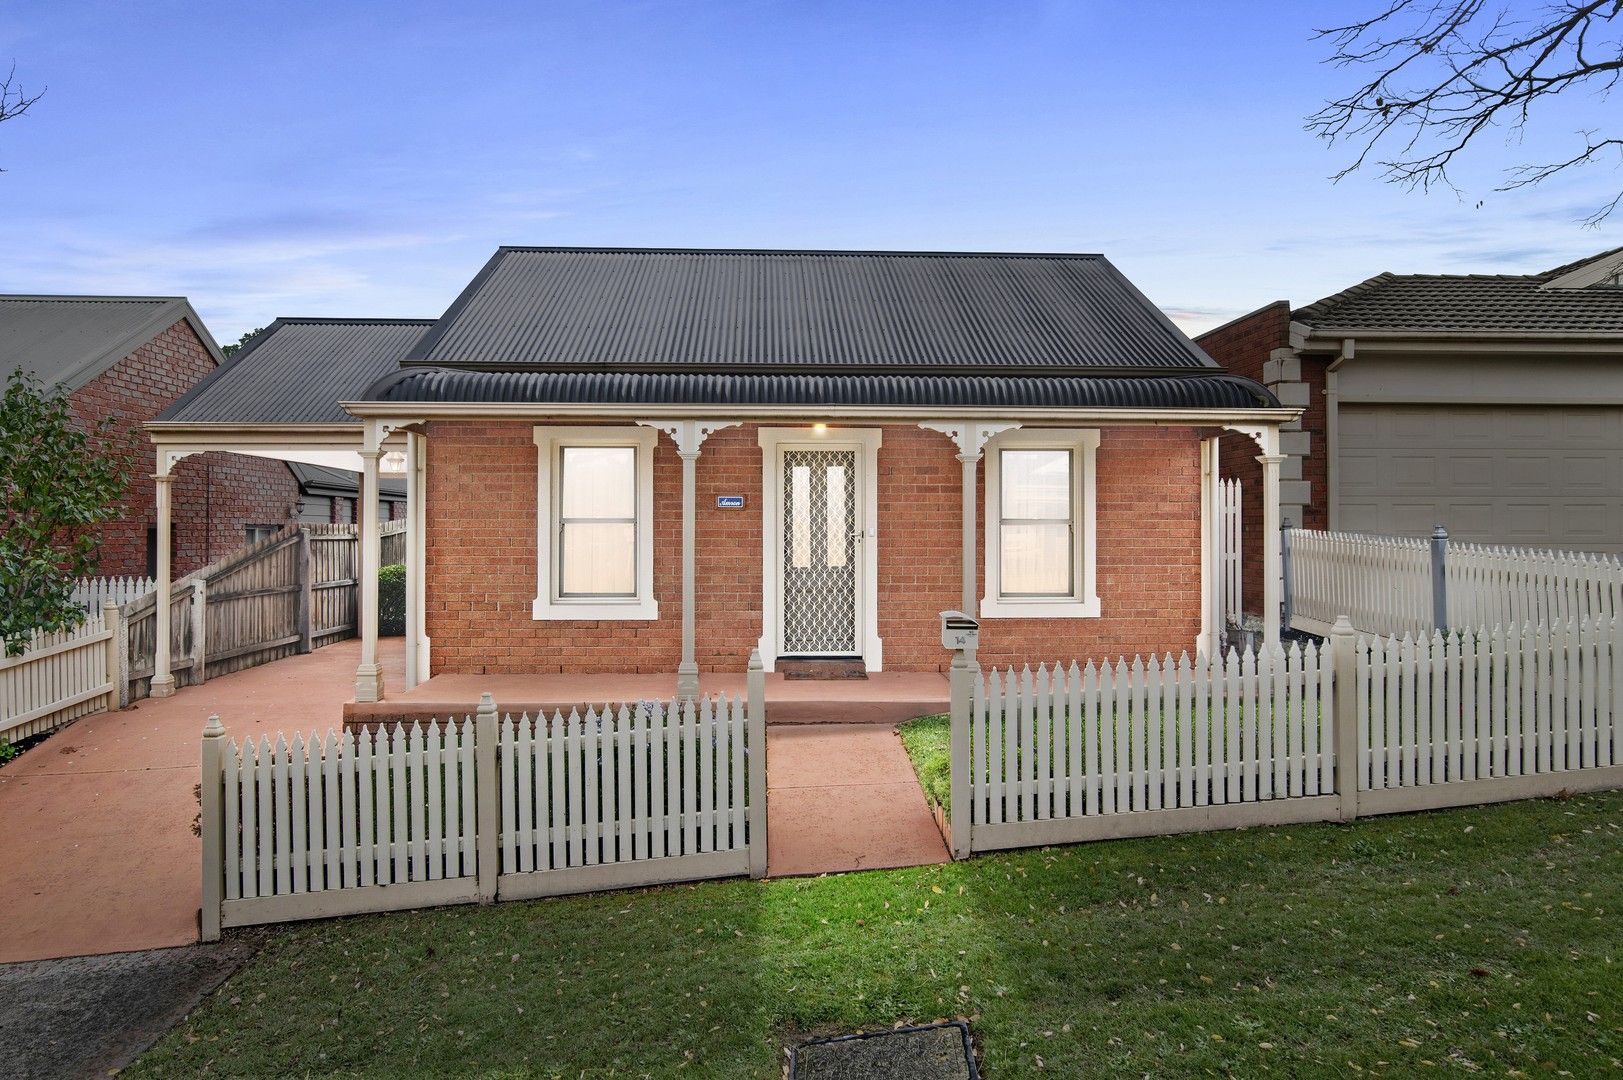 3 bedrooms House in 14 Rosewood Place CHIRNSIDE PARK VIC, 3116